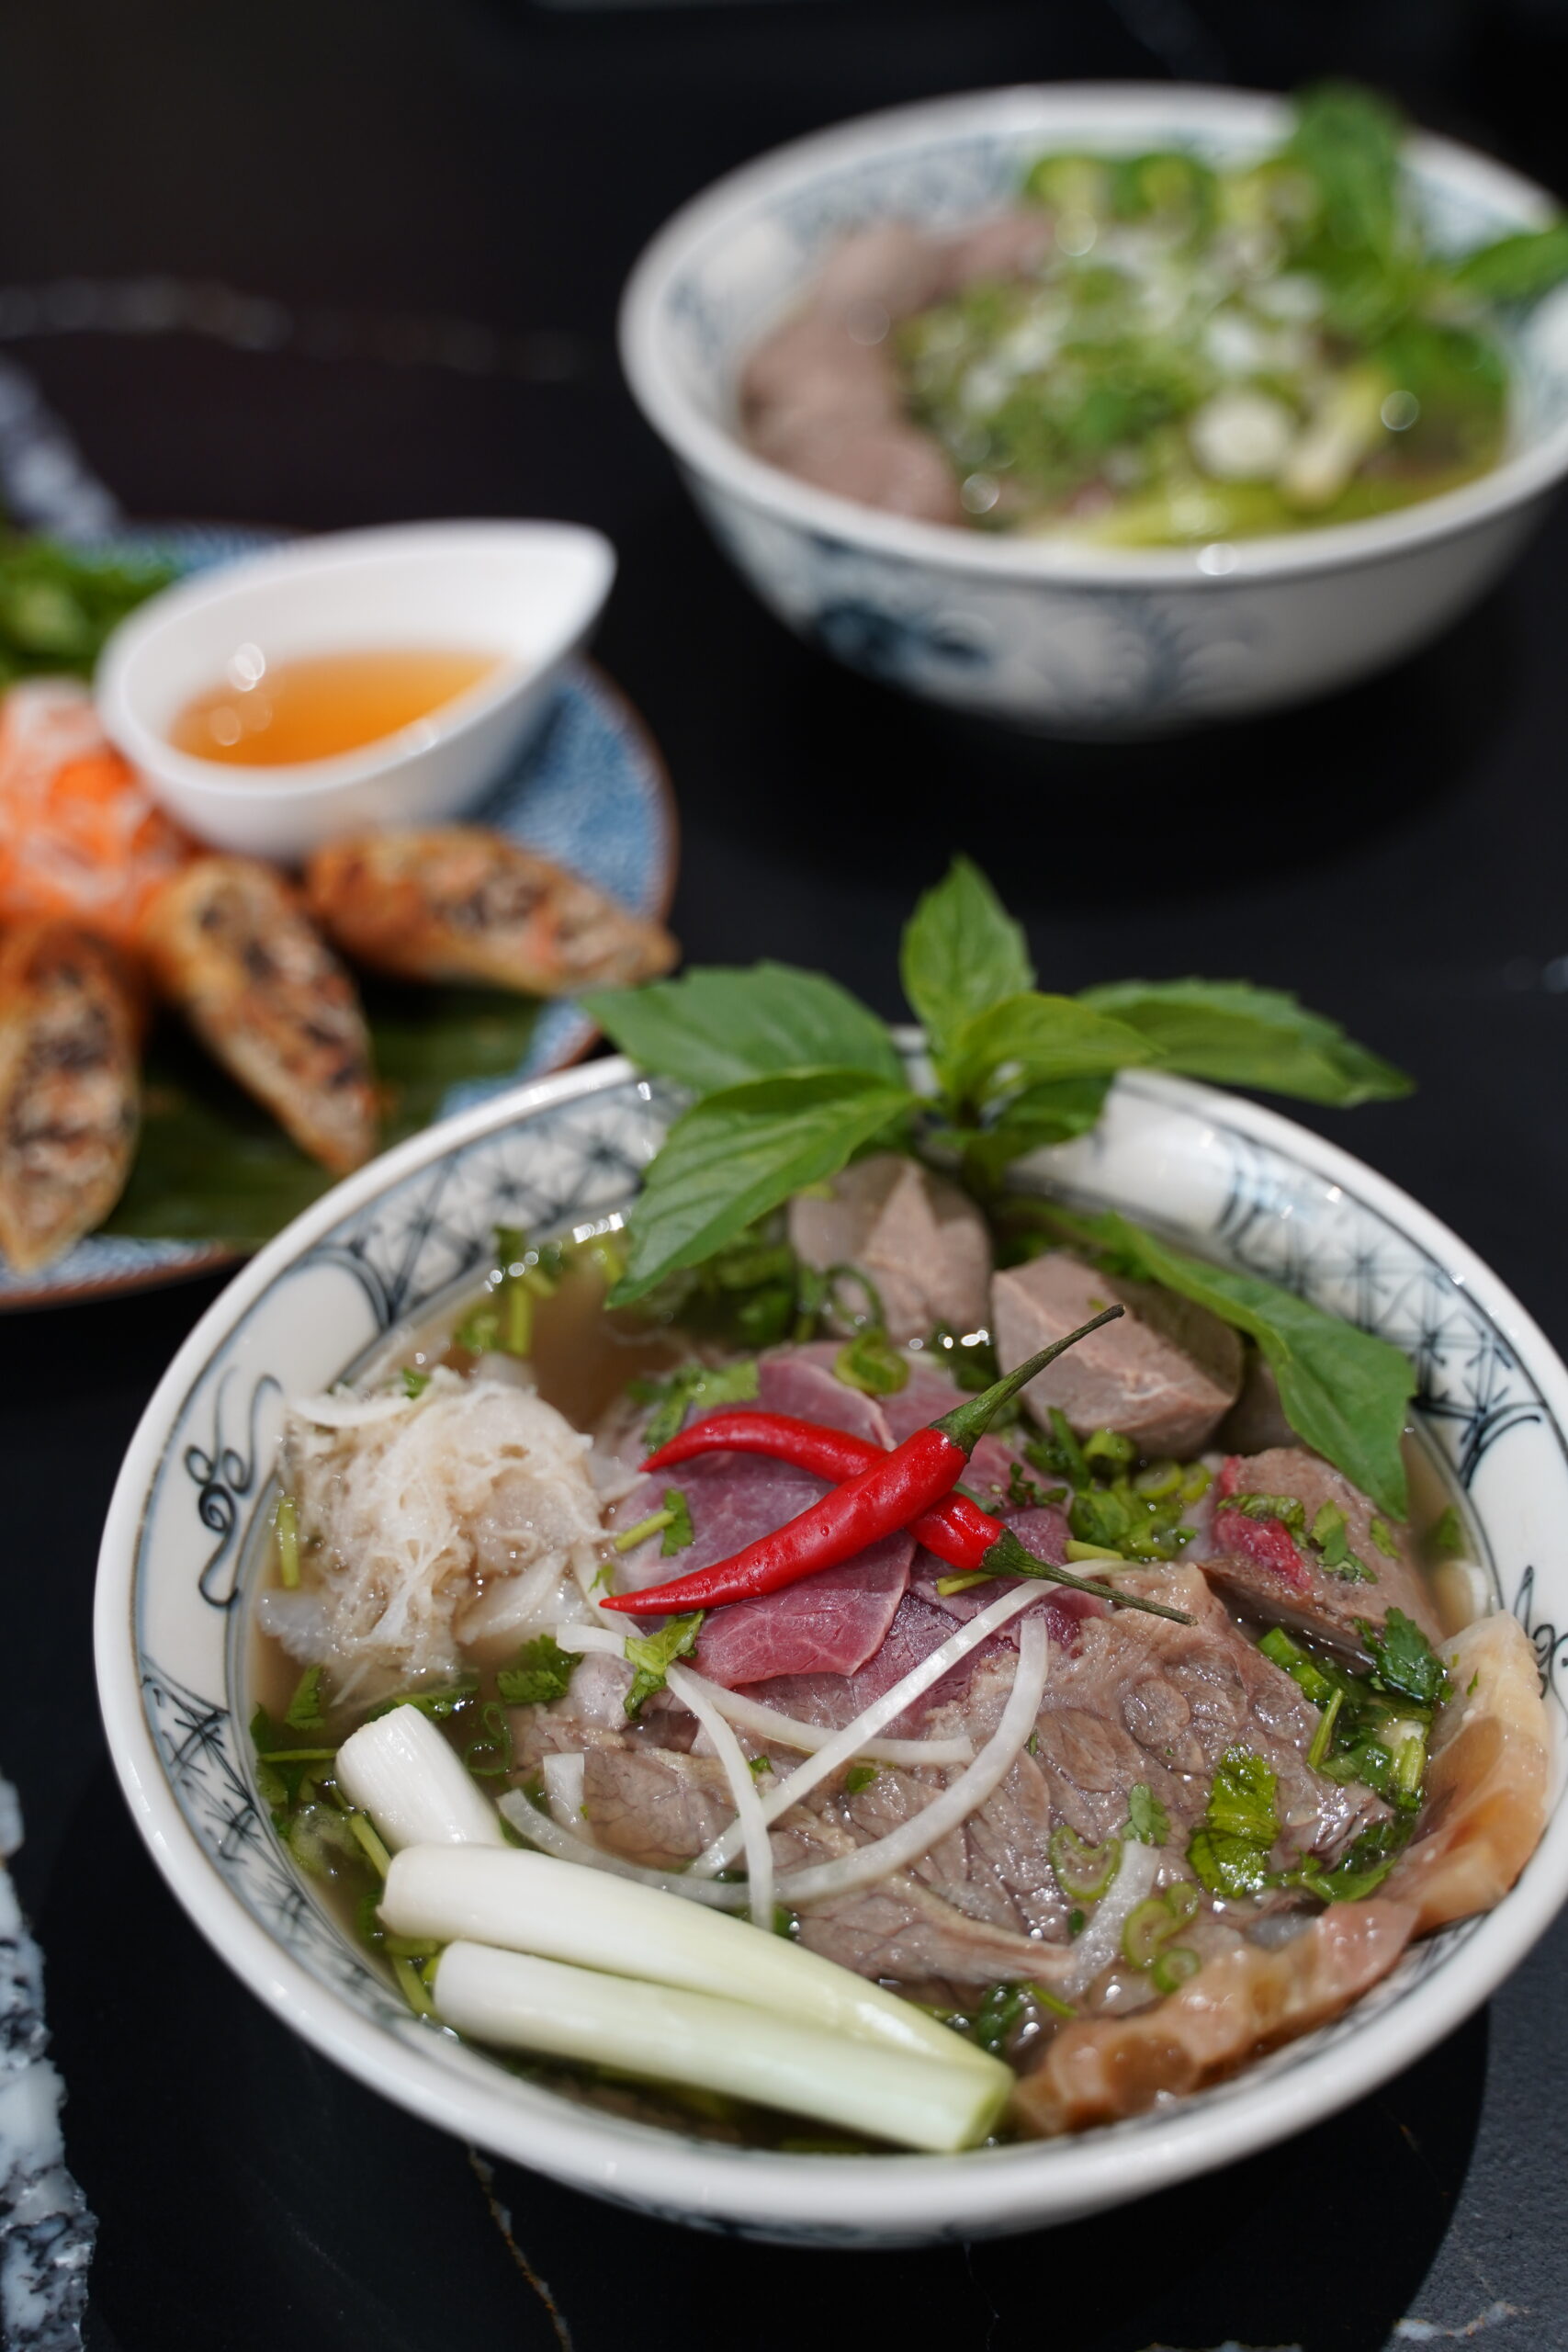 Special Pho